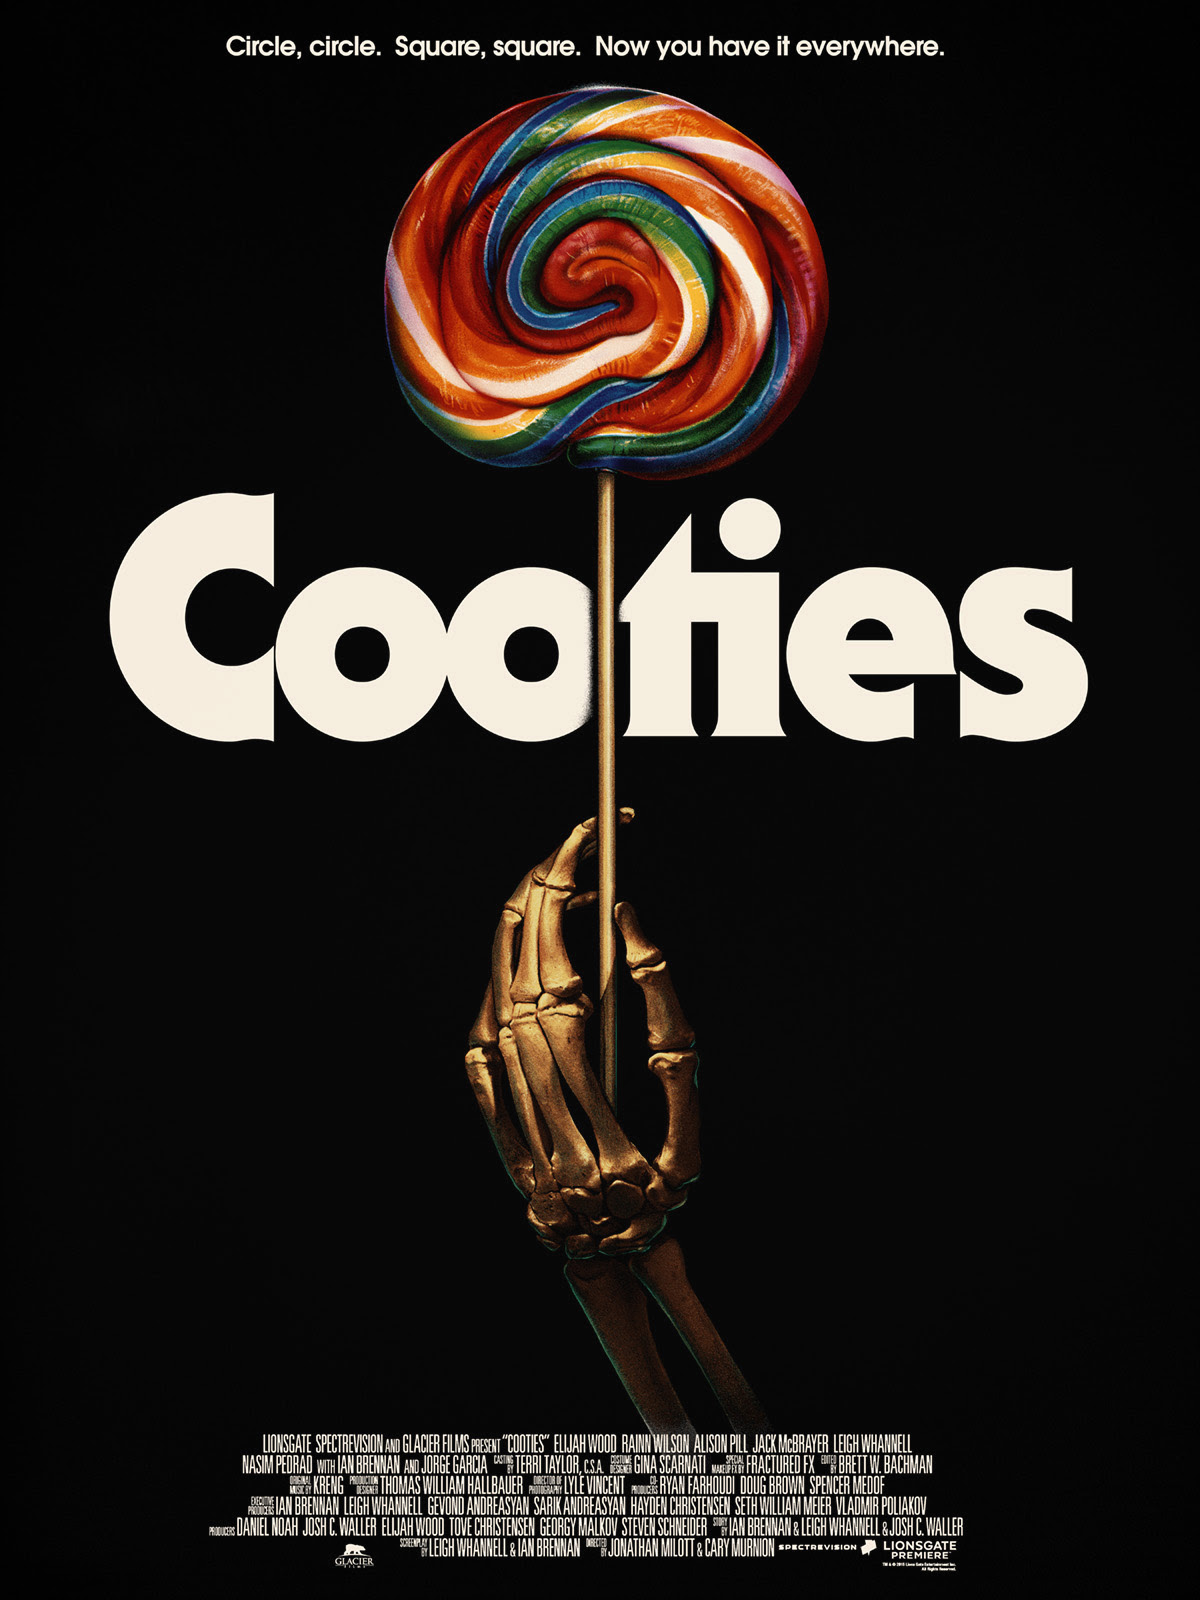 Cooties by Jay Shaw & Jason Edmiston. 18"x24" screen print. Hand numbered. Edition of 125. Printed by D&L Screenprinting. $35